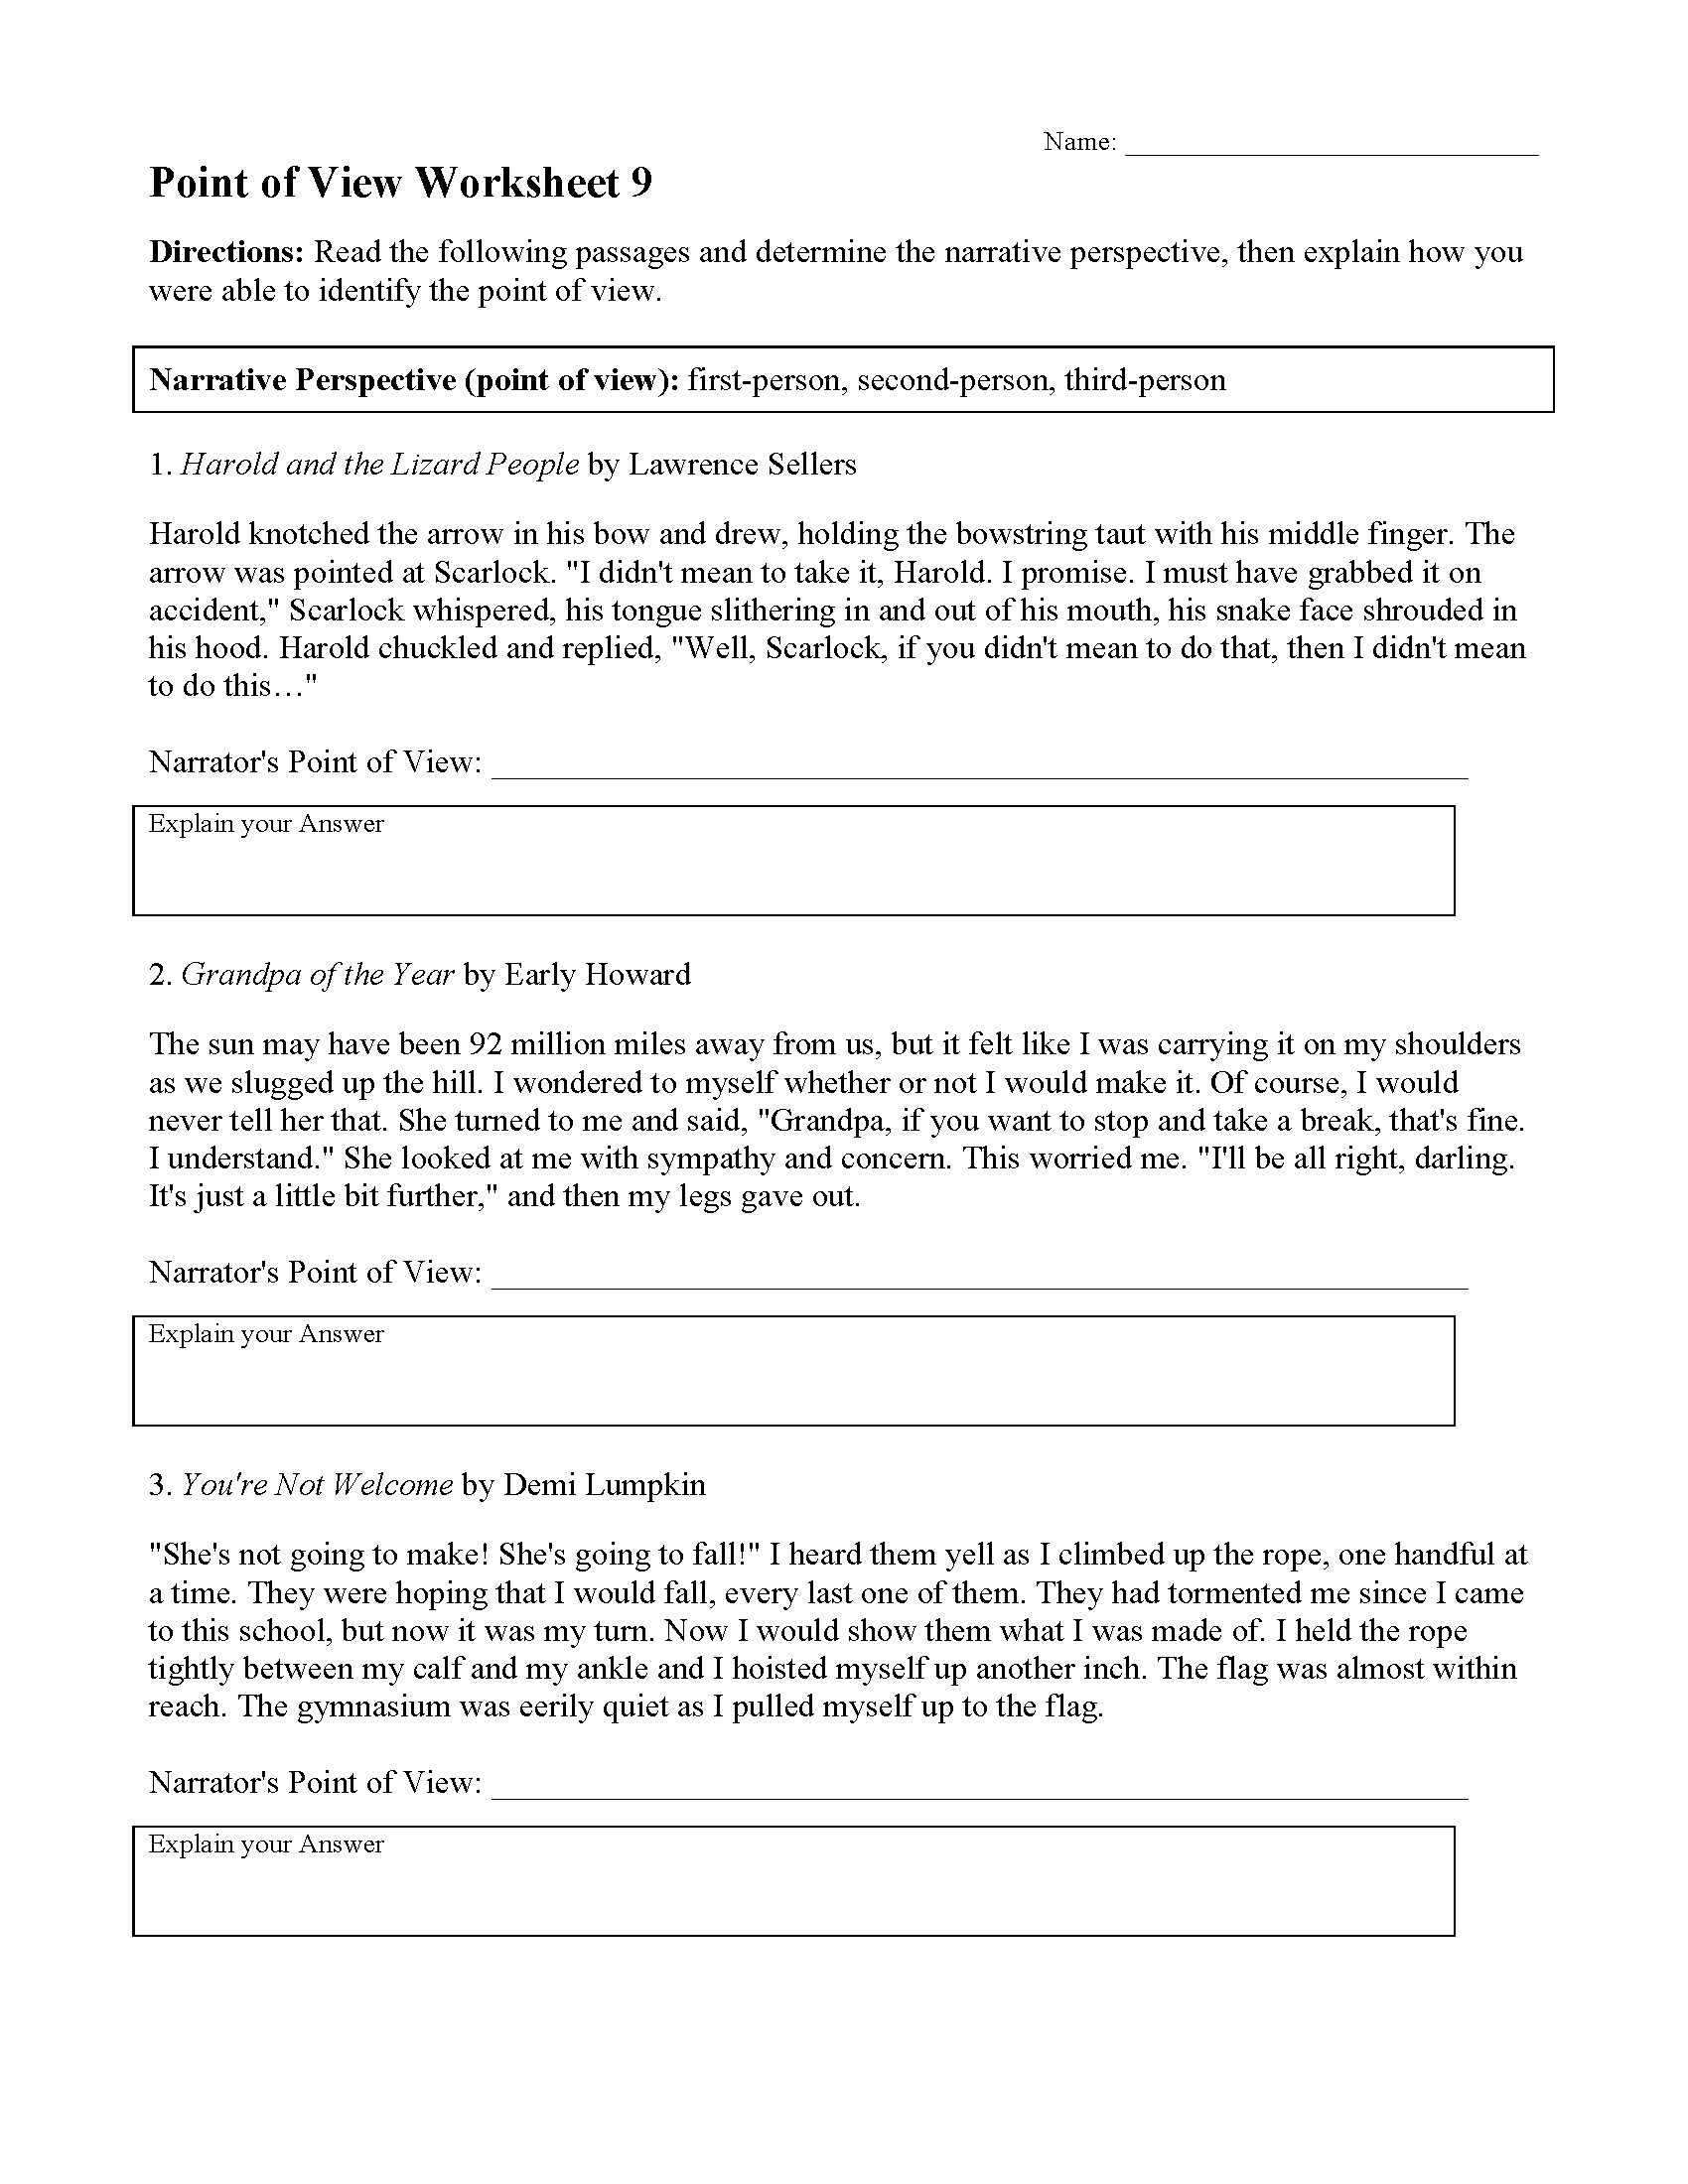 This is a preview image of Point of View Worksheet 9. Click on it to enlarge it or view the source file.